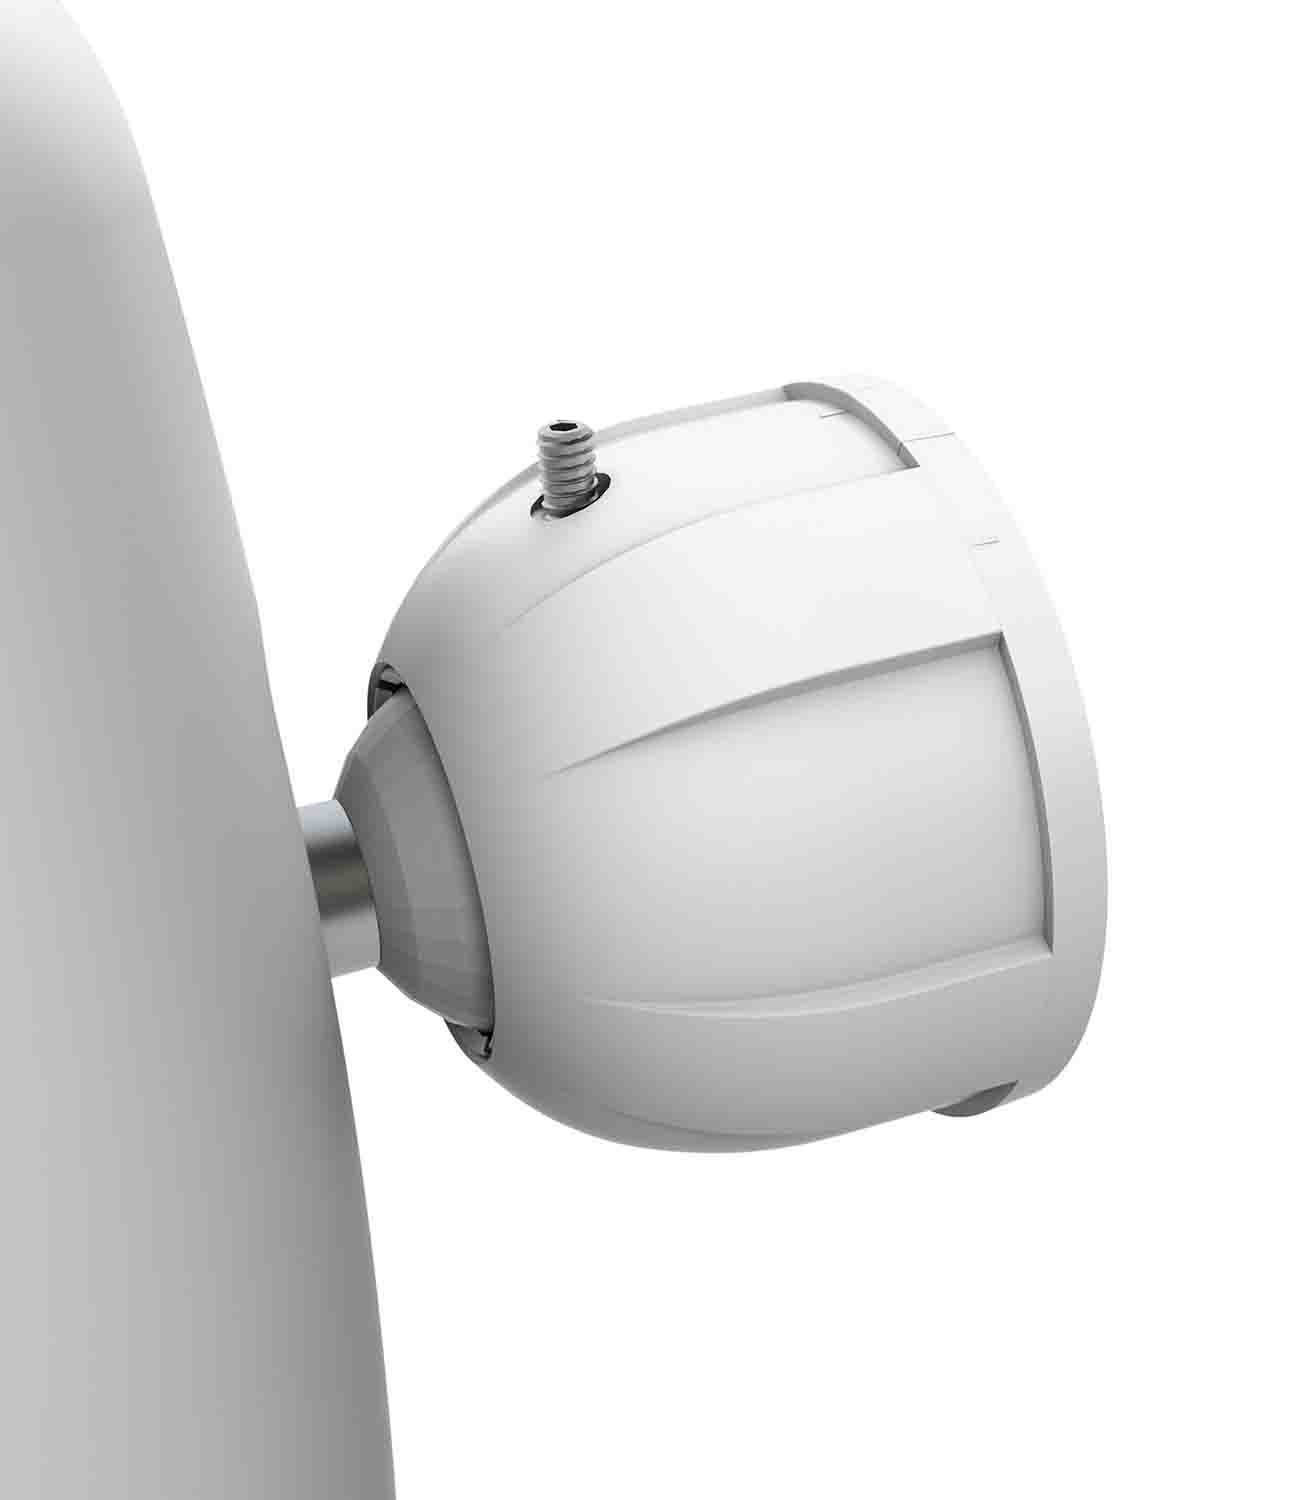 LD Systems DQOR 8 W, 8" Two-Way Passive In/Out Door Installation Loudspeaker 8 Ohm - White by LD Systems